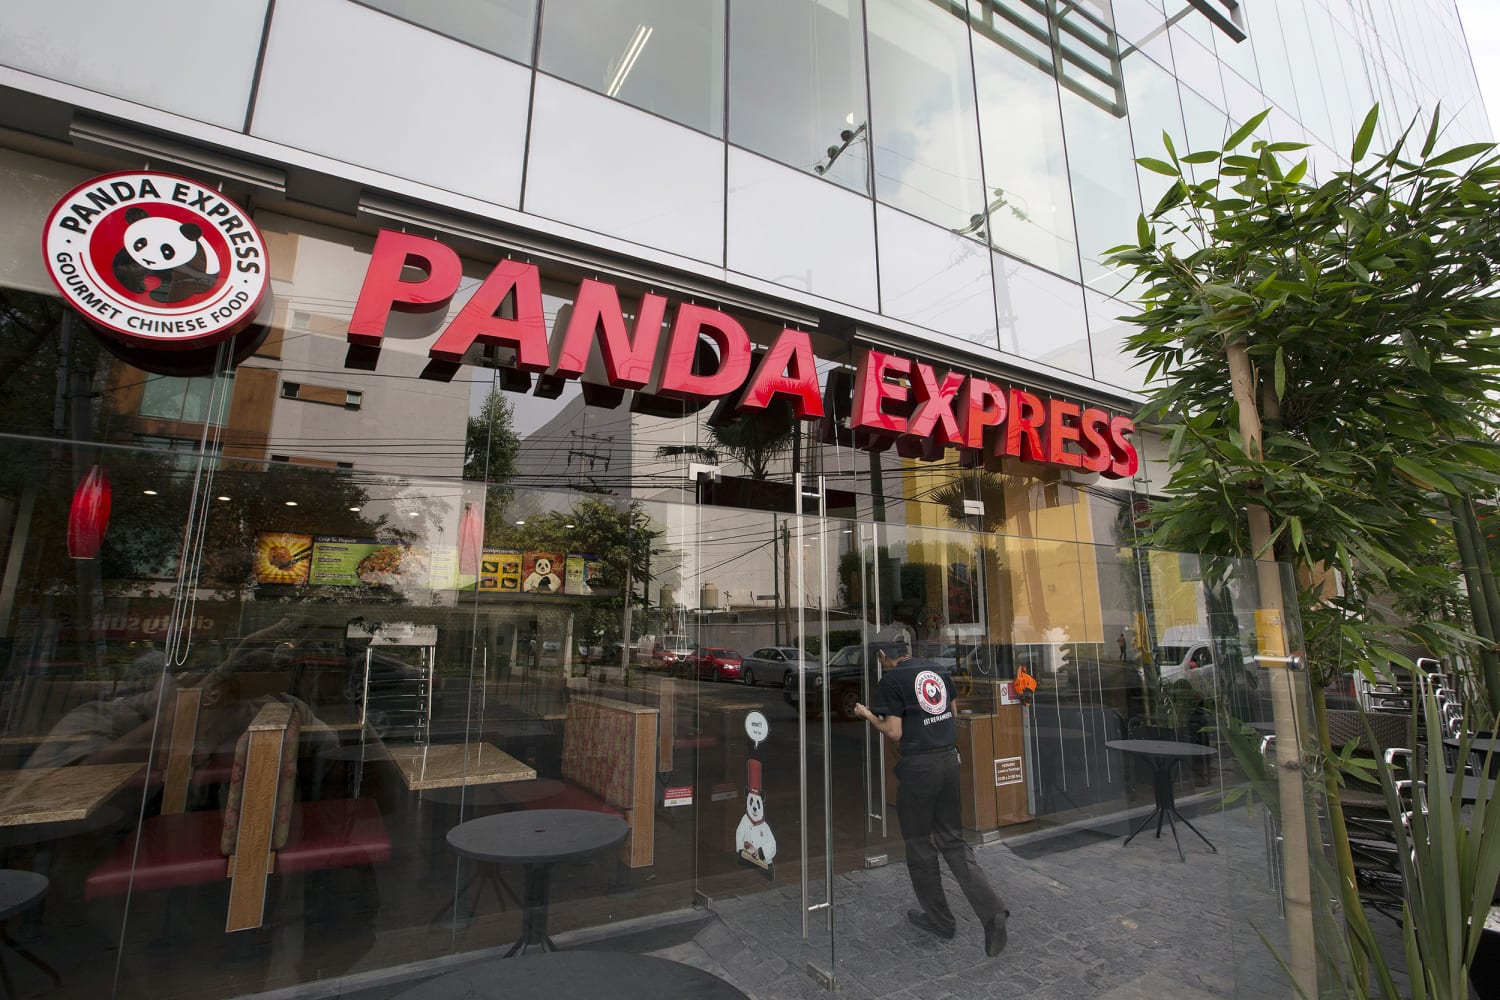 Panda Express employee forced to strip during trust-building exercise, lawsuit says